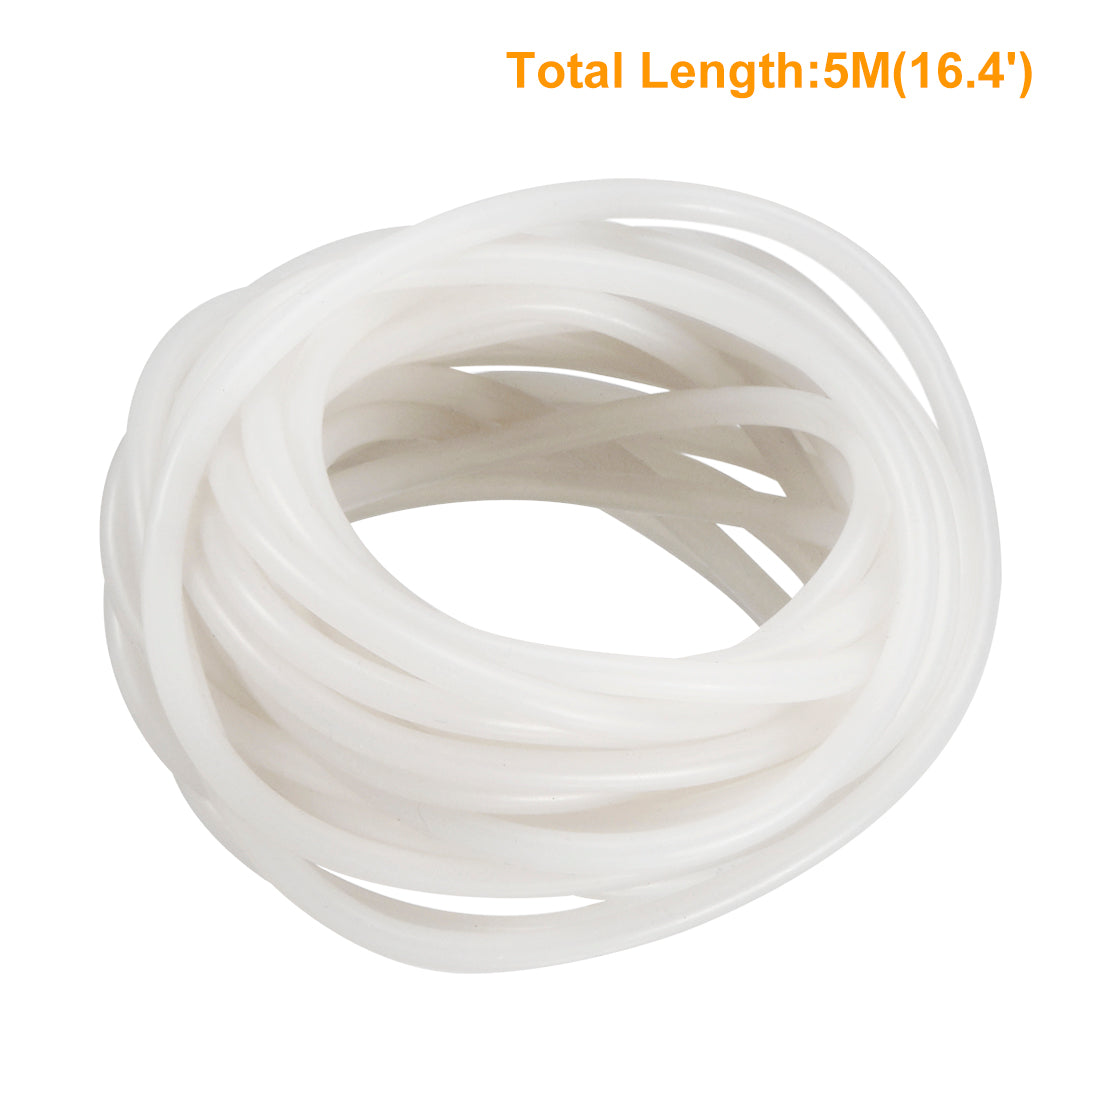 uxcell Uxcell Silicone Tube, 6mm ID, 9mm OD, 16.4', Flexible Silicone Rubber Tubing, Water Air Hose Pipe, Translucent, for Pump Transfer